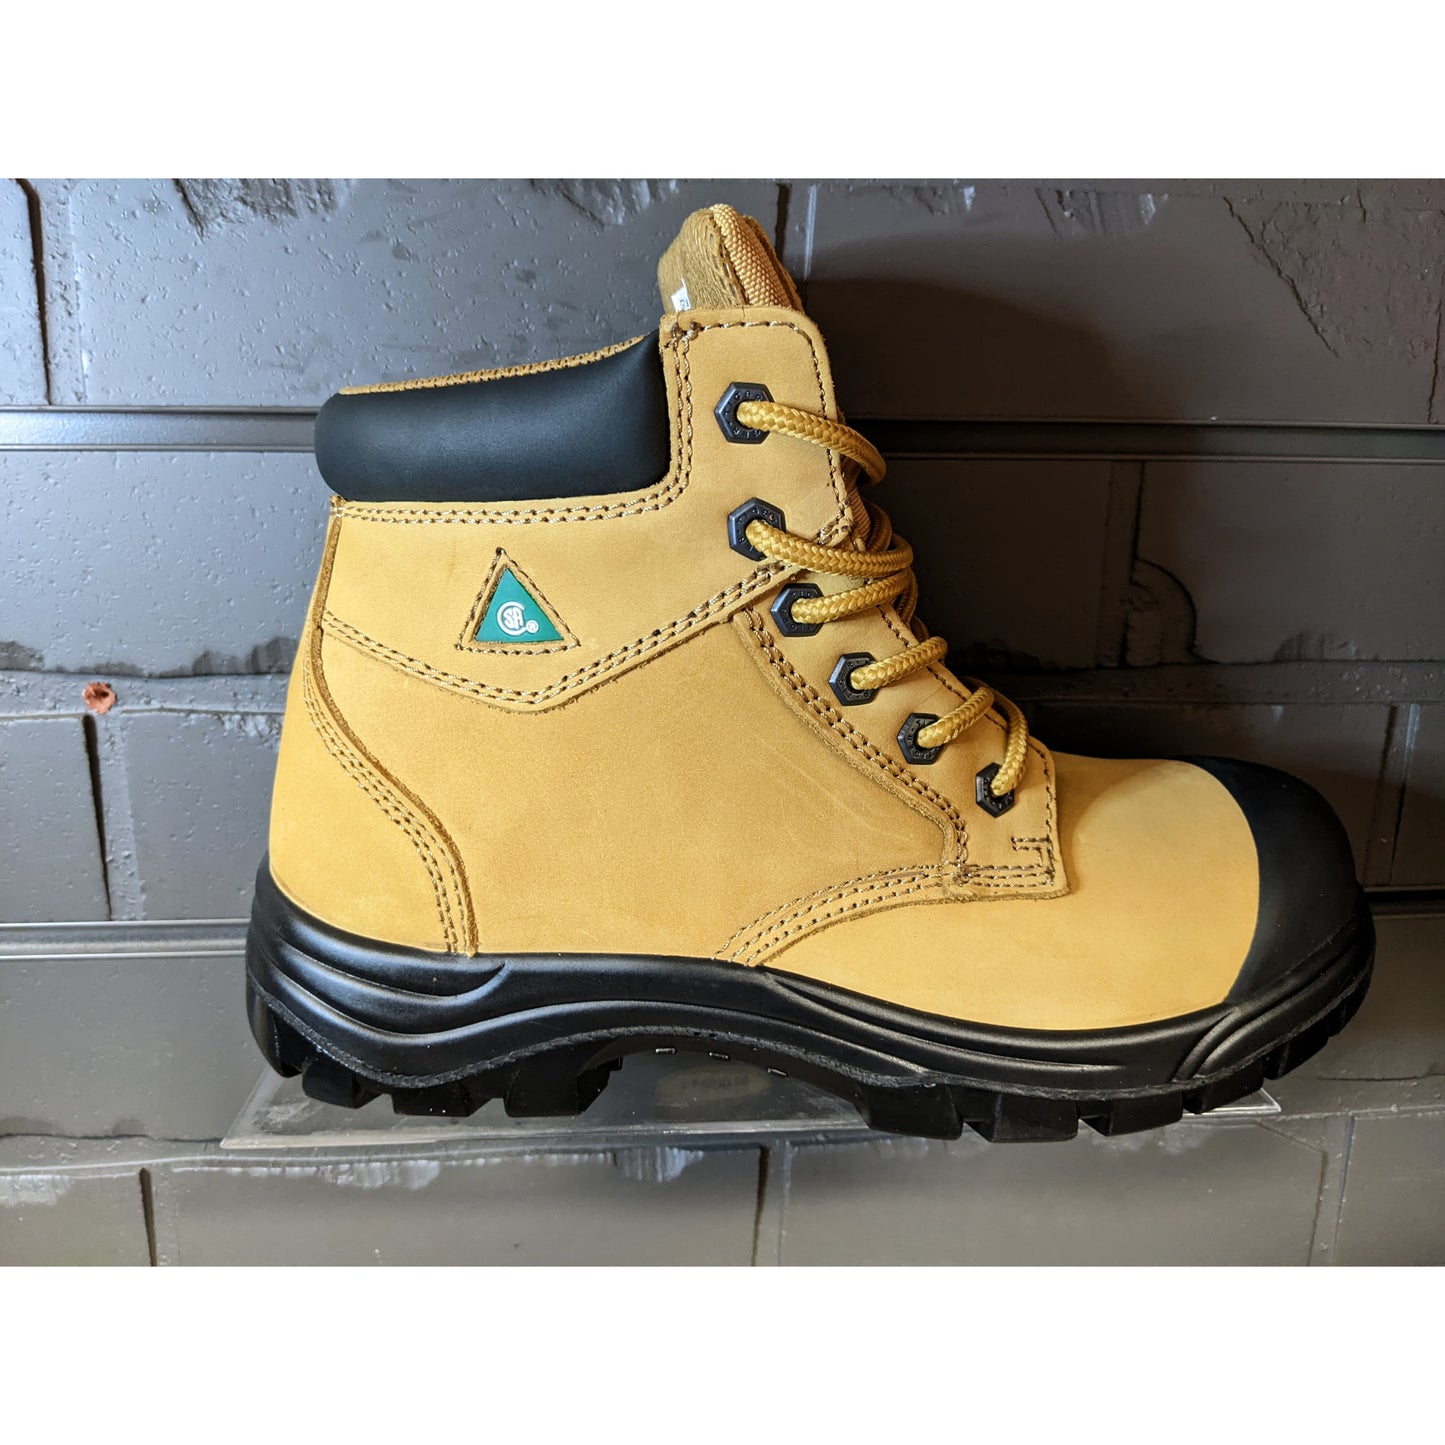 Men's Steel Toe Boots - 6" CSA Certified Safety Boot 3055W